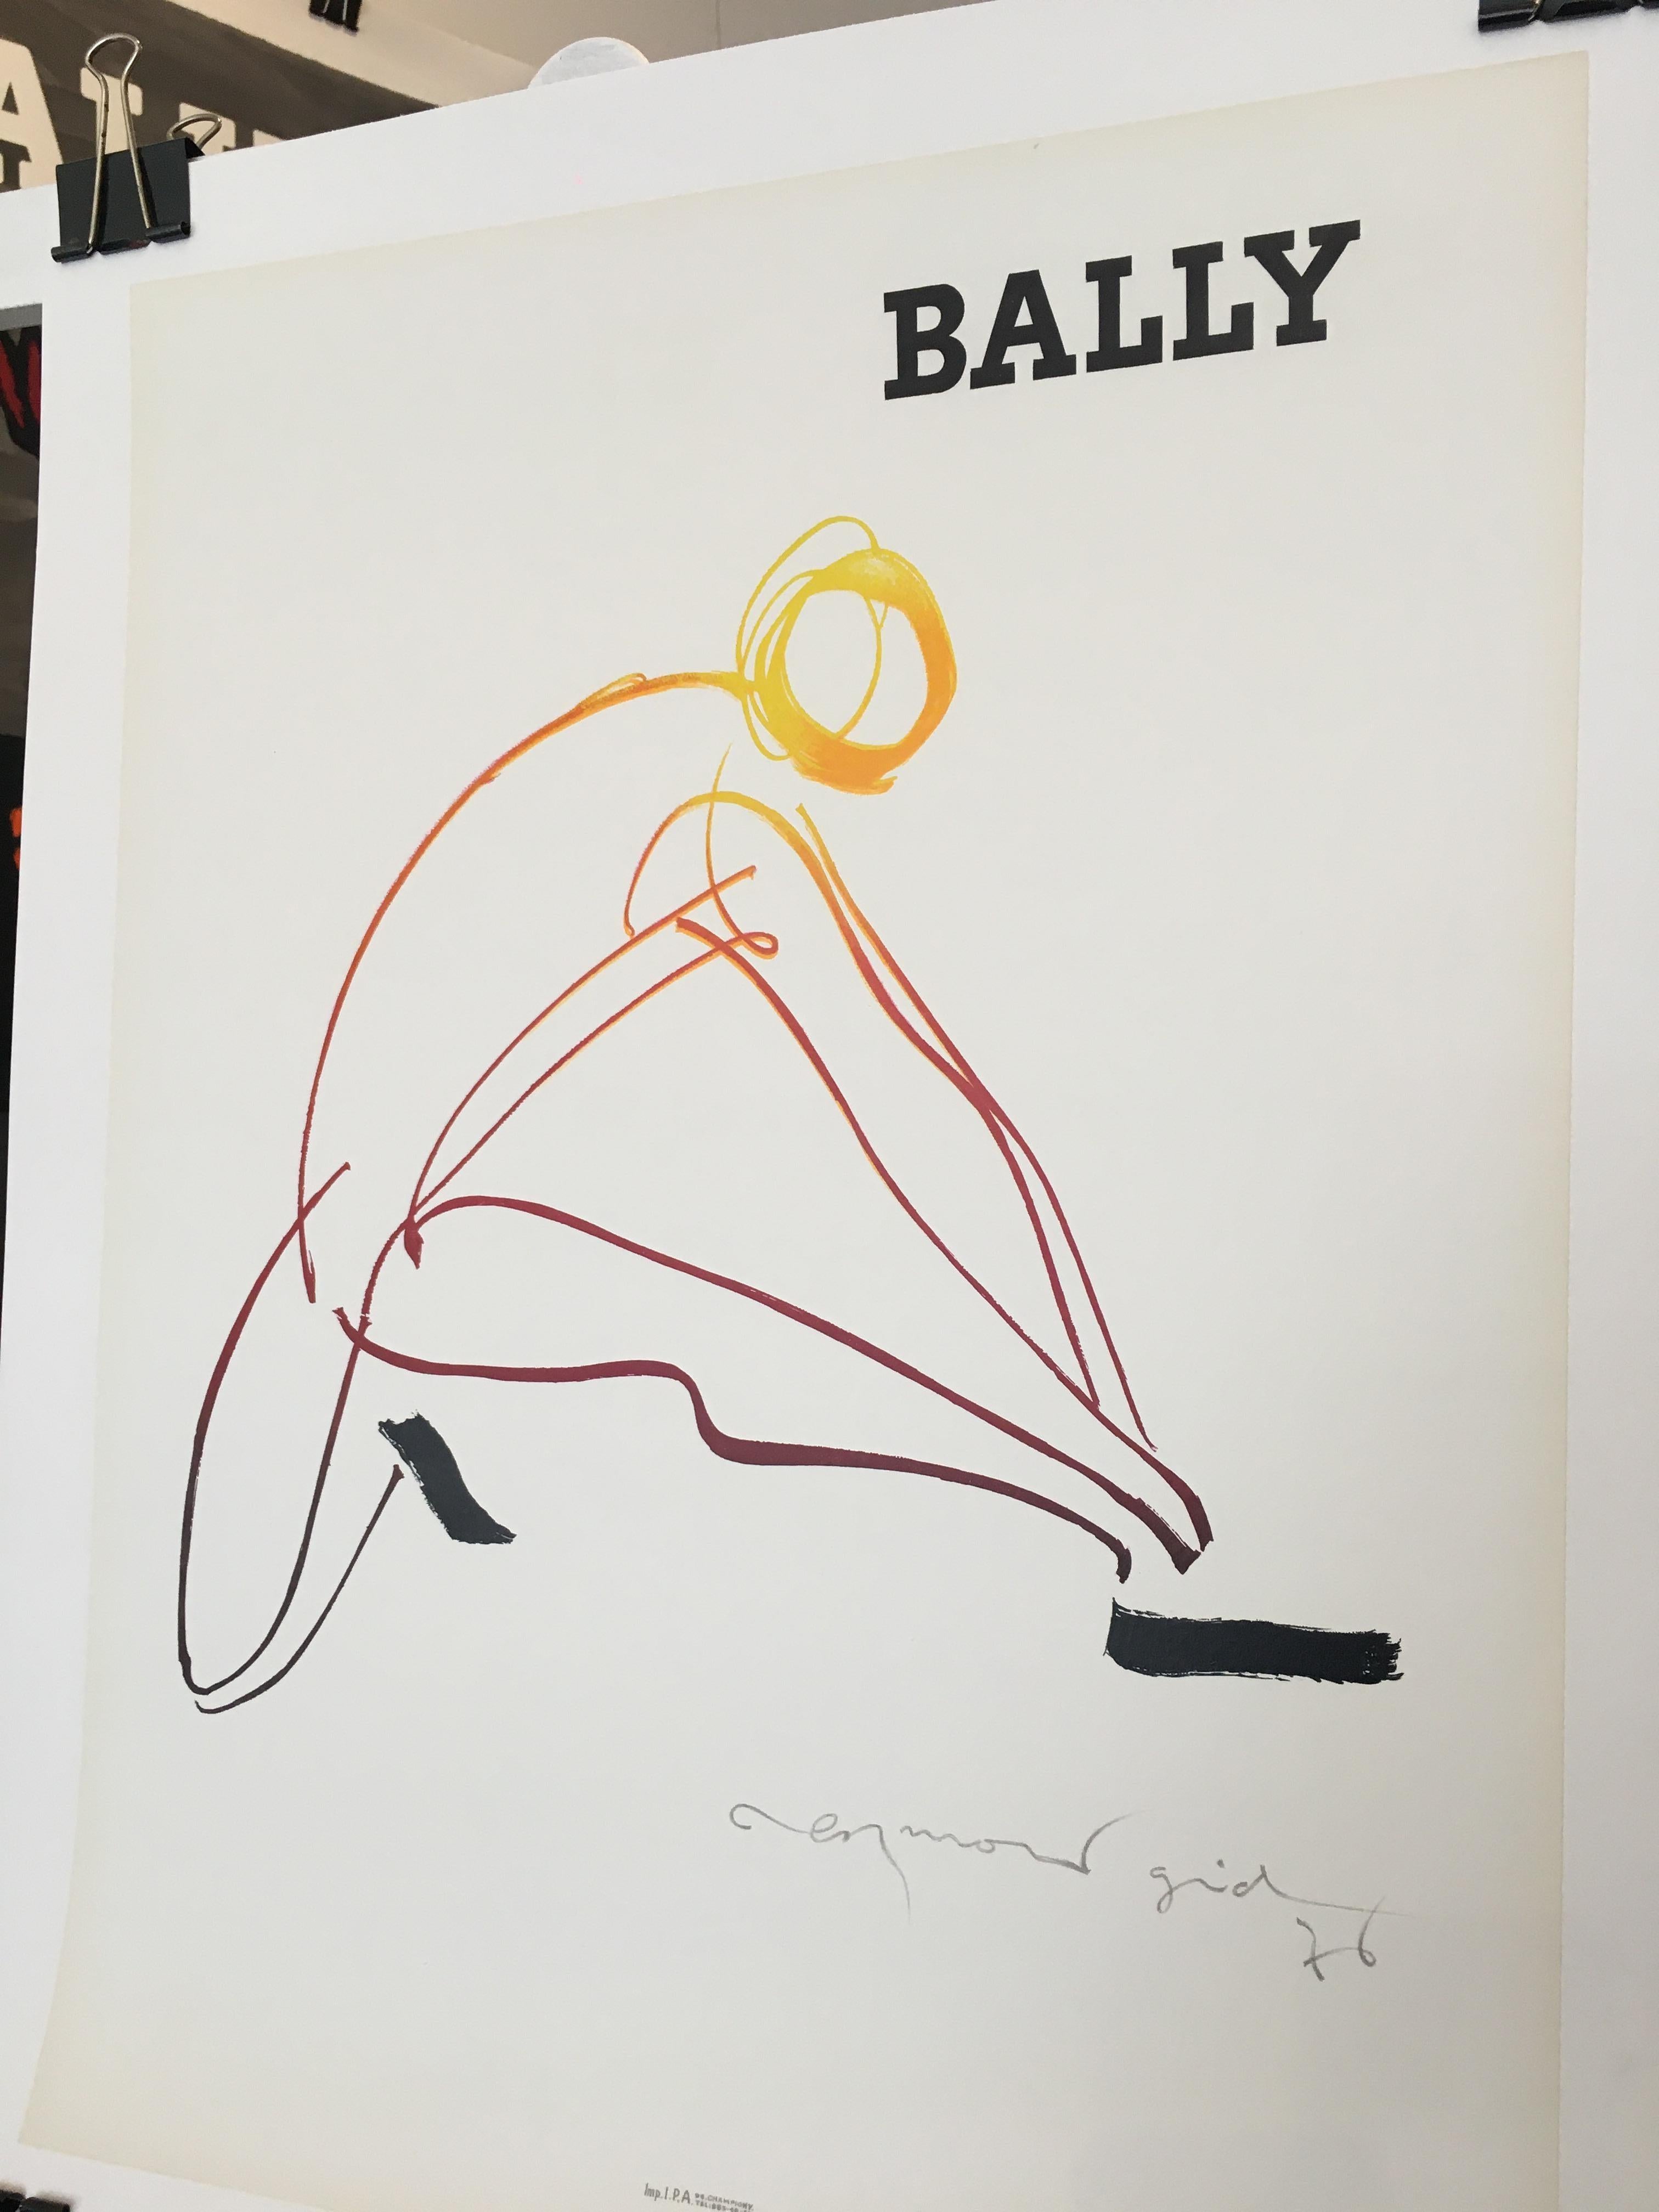 French Bally Gid Homme, Small Format, Original Vintage Poster, 1976